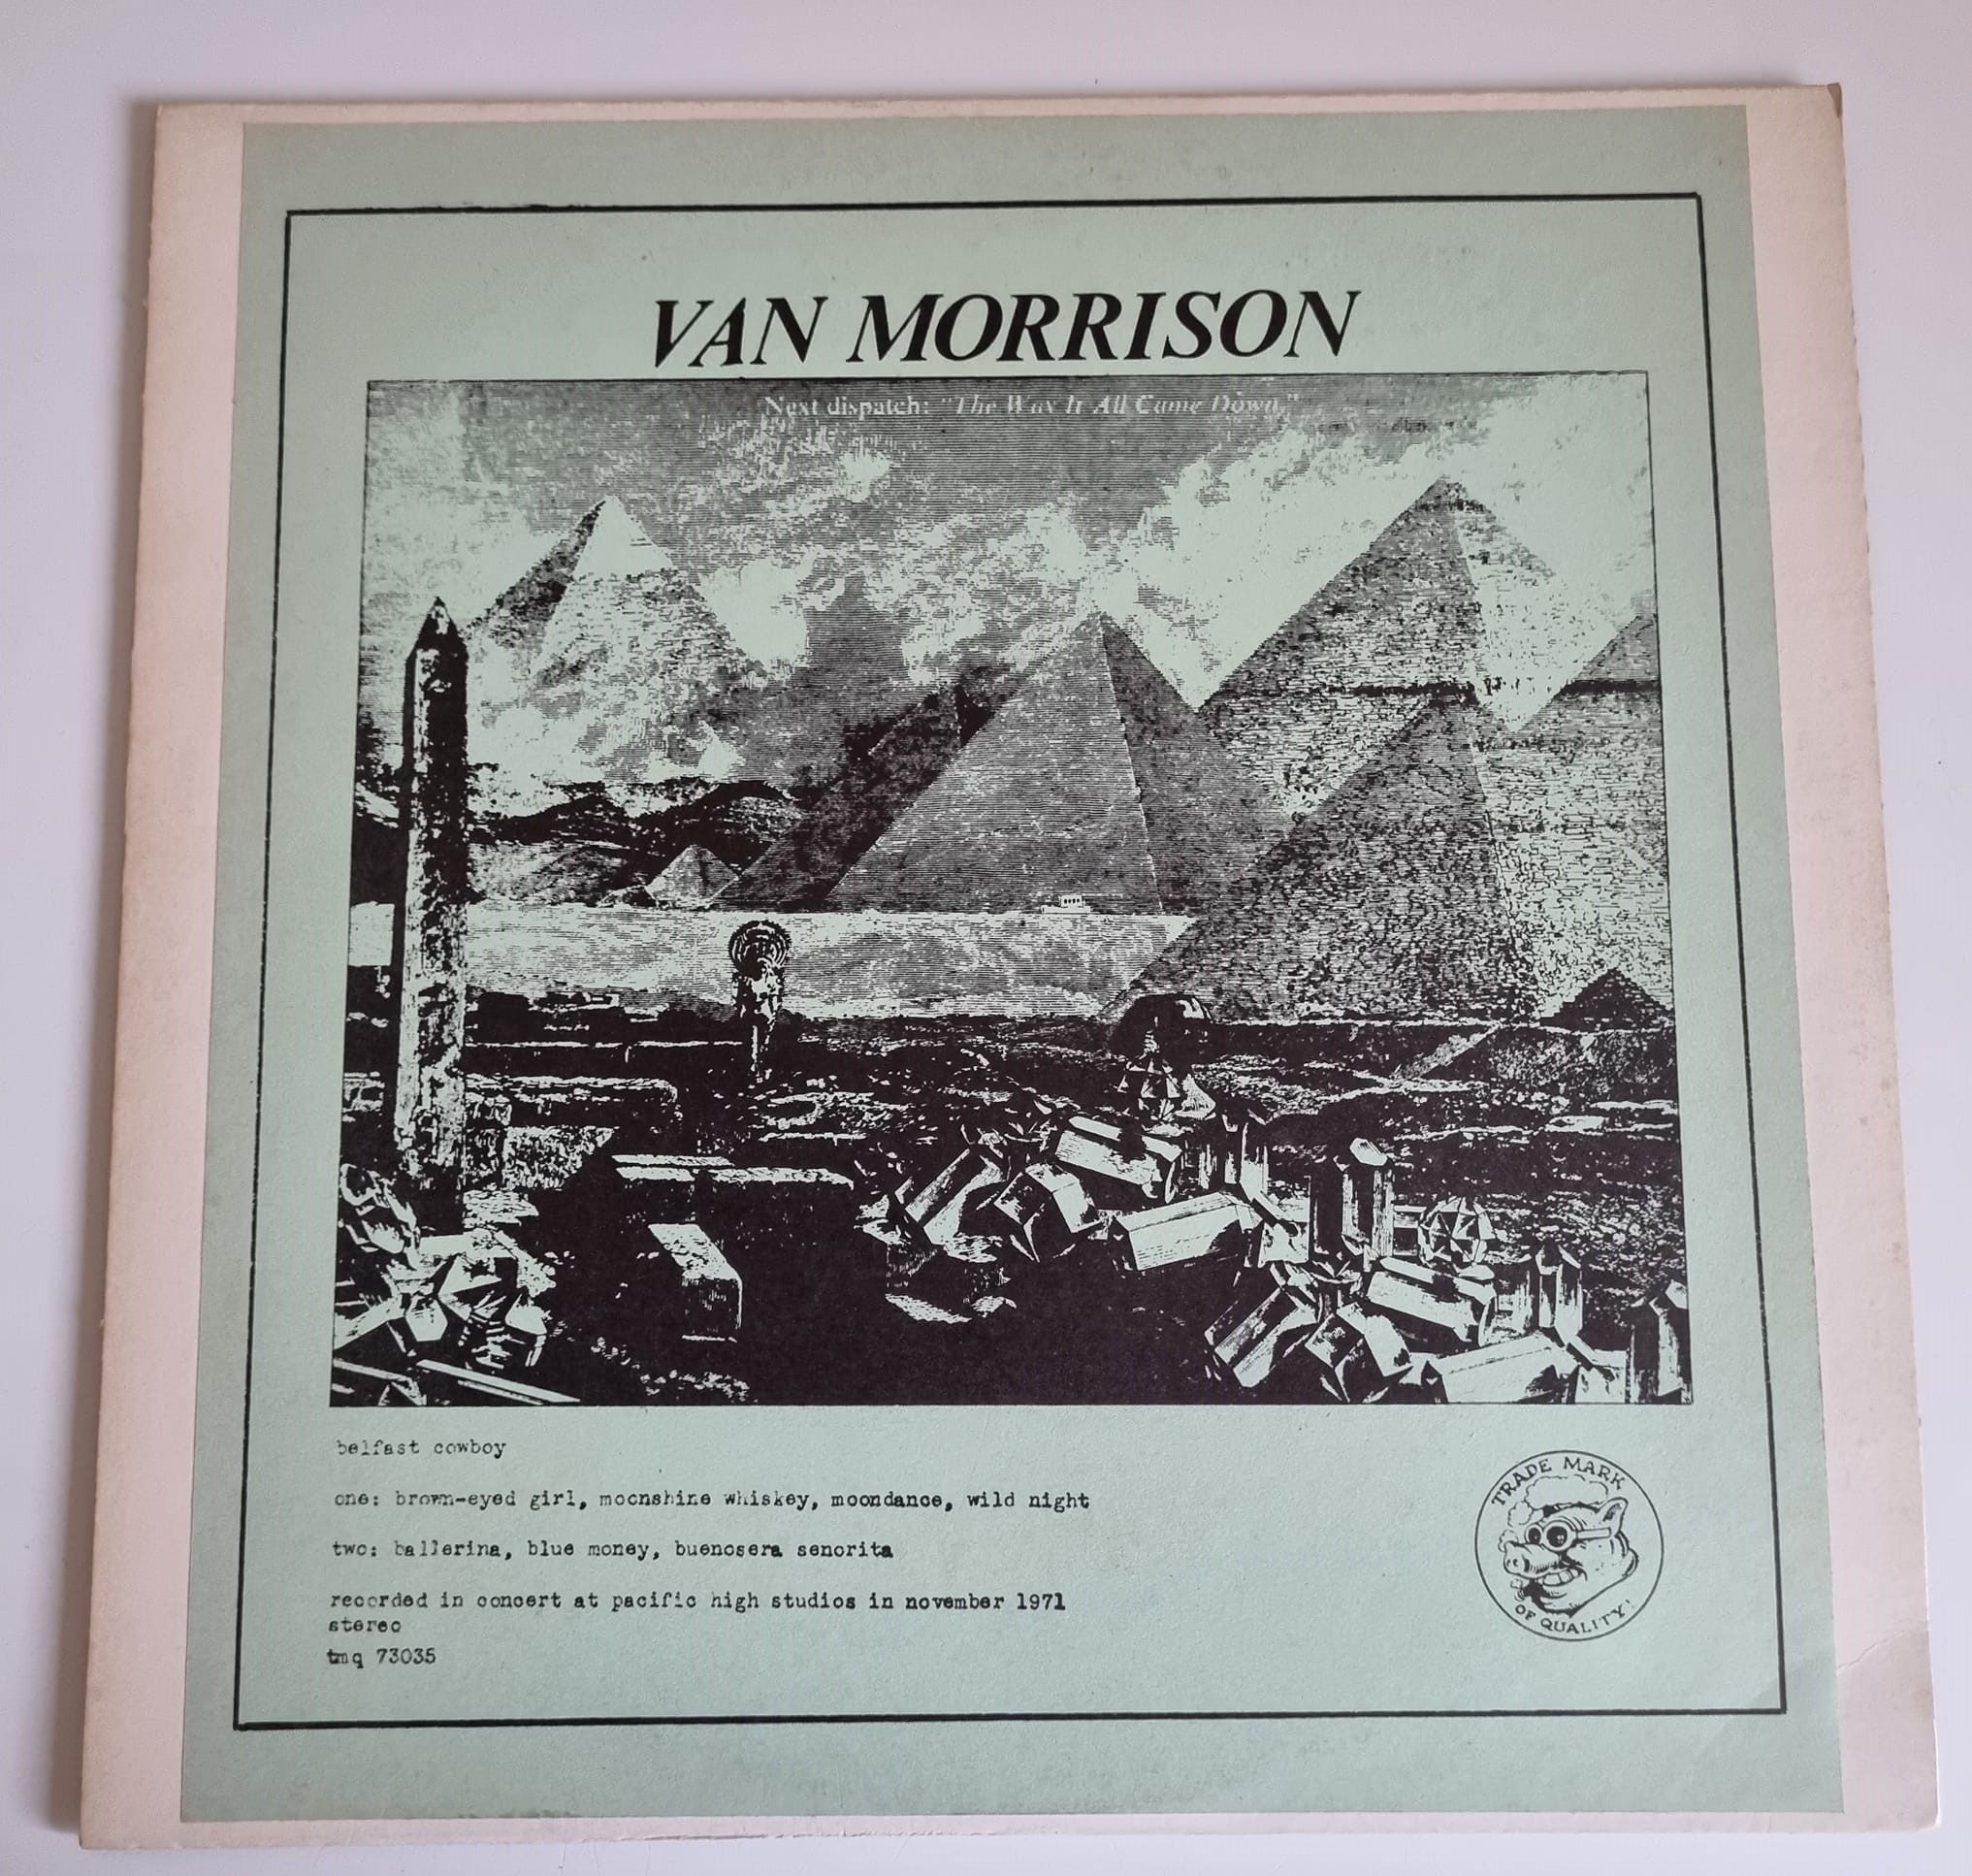 Buy this rare Van Morrison record by clicking here